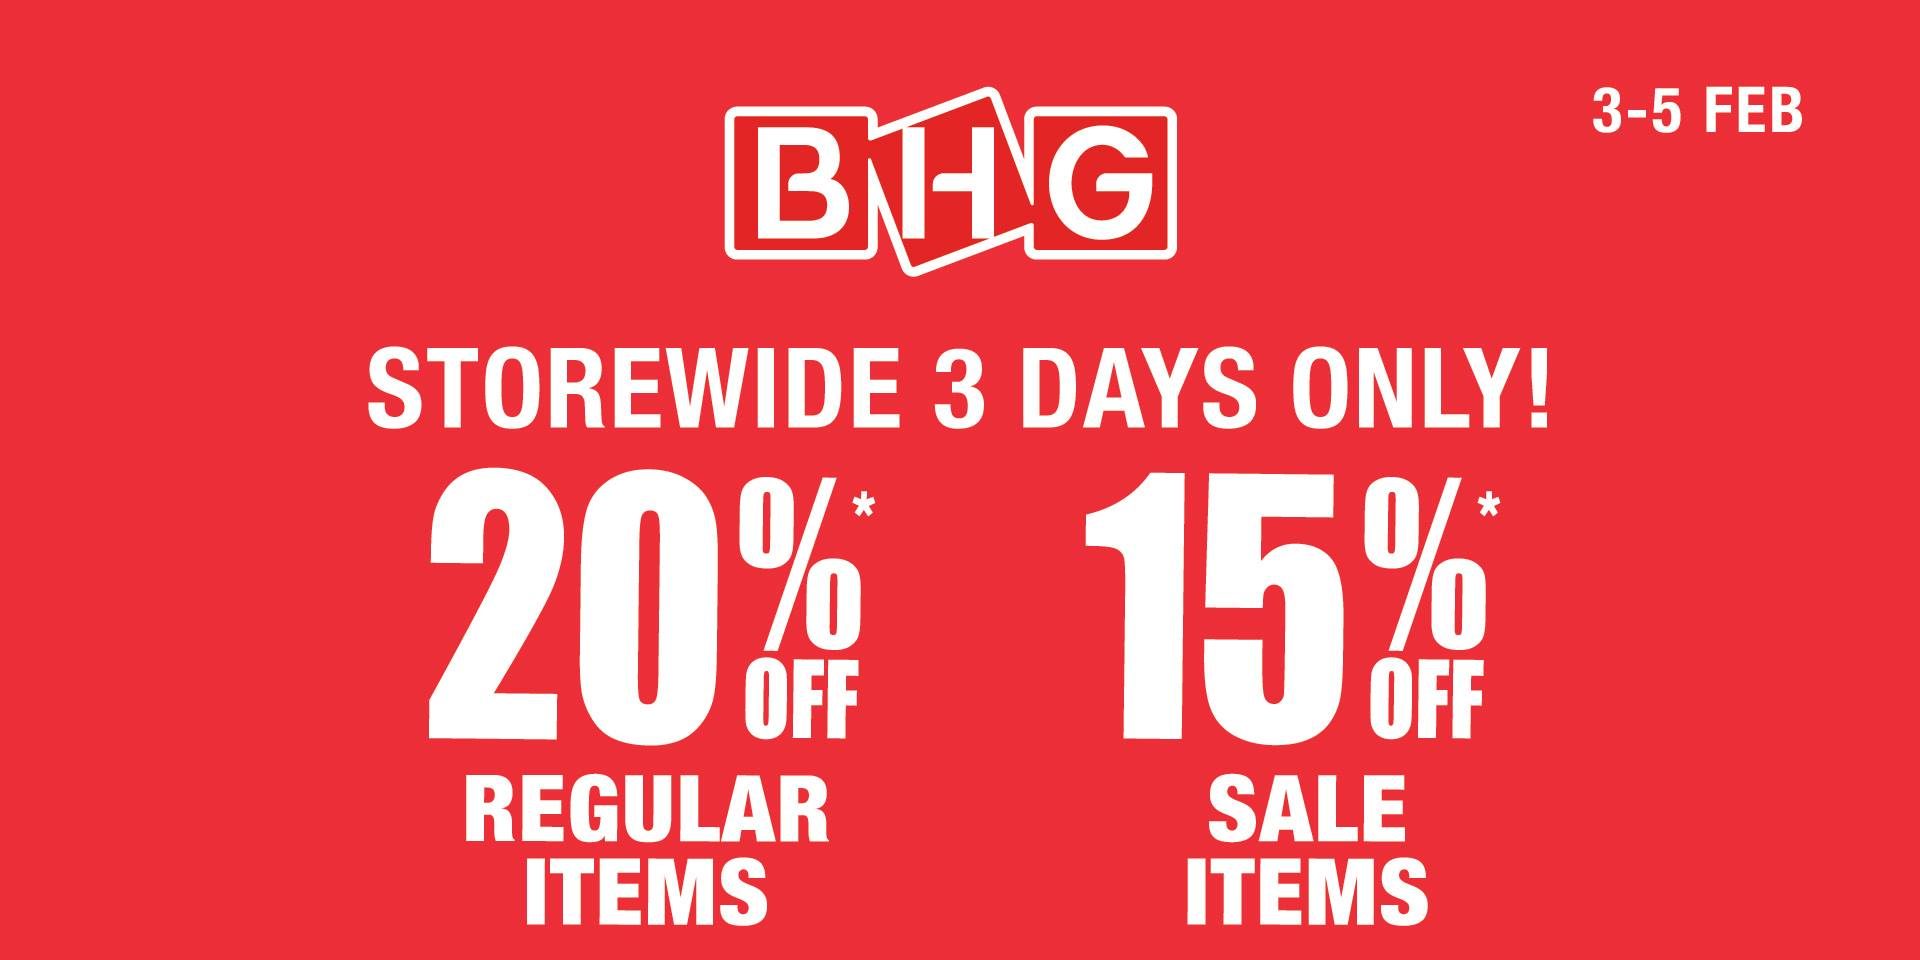 BHG Singapore Storewide 3 Days Red Hot Sale Up to 20% Off Promotion 3-5 Feb 2017